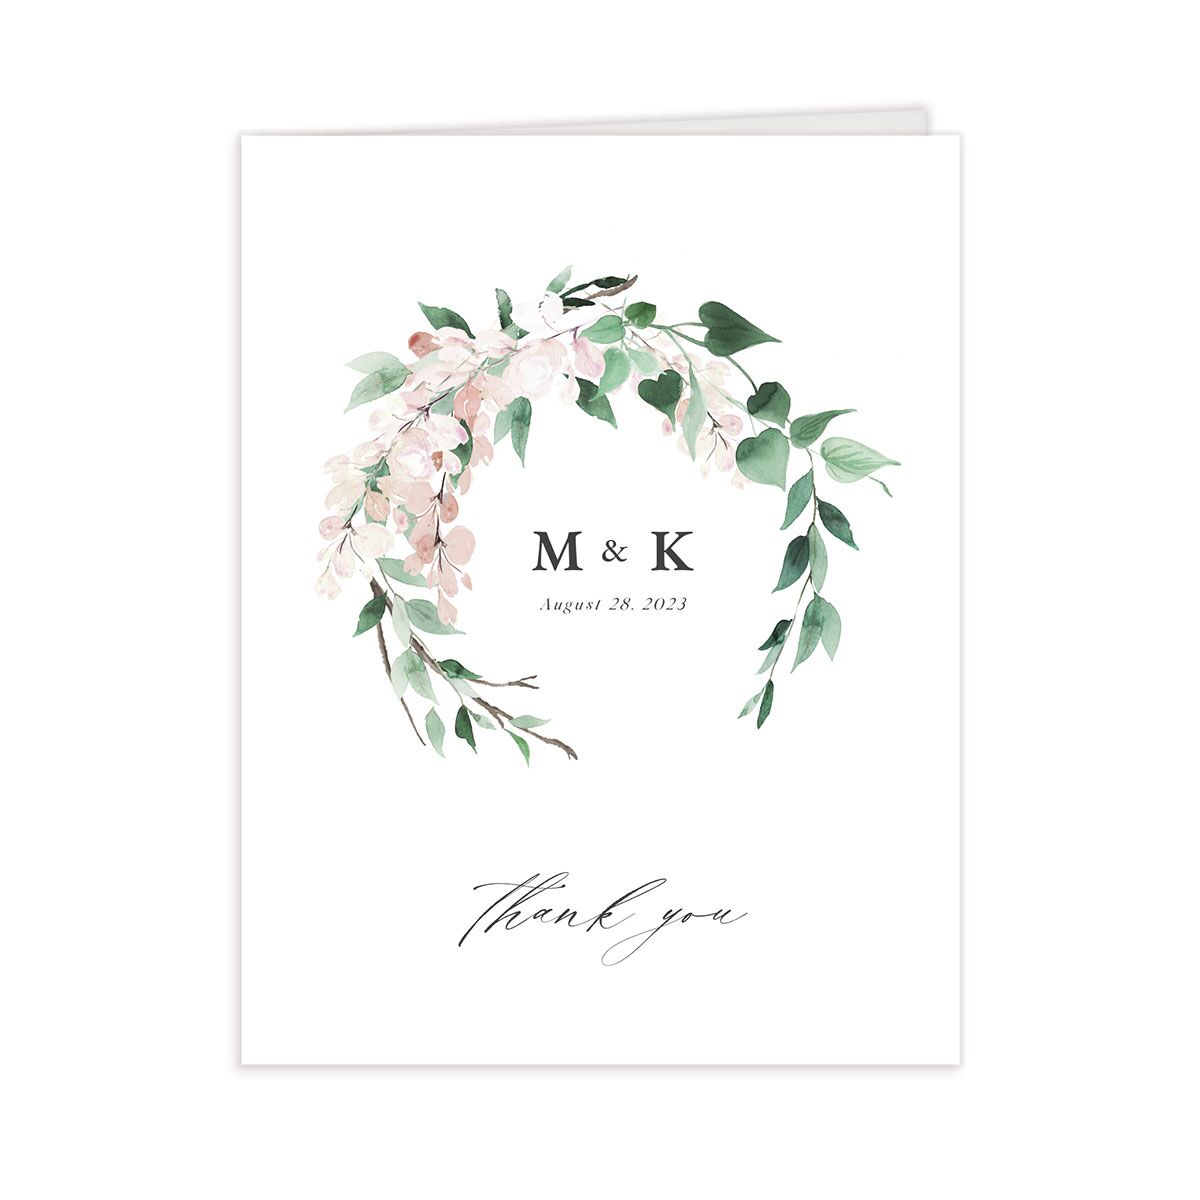 Enchanting Wisteria Thank You Cards [object Object] in Pink